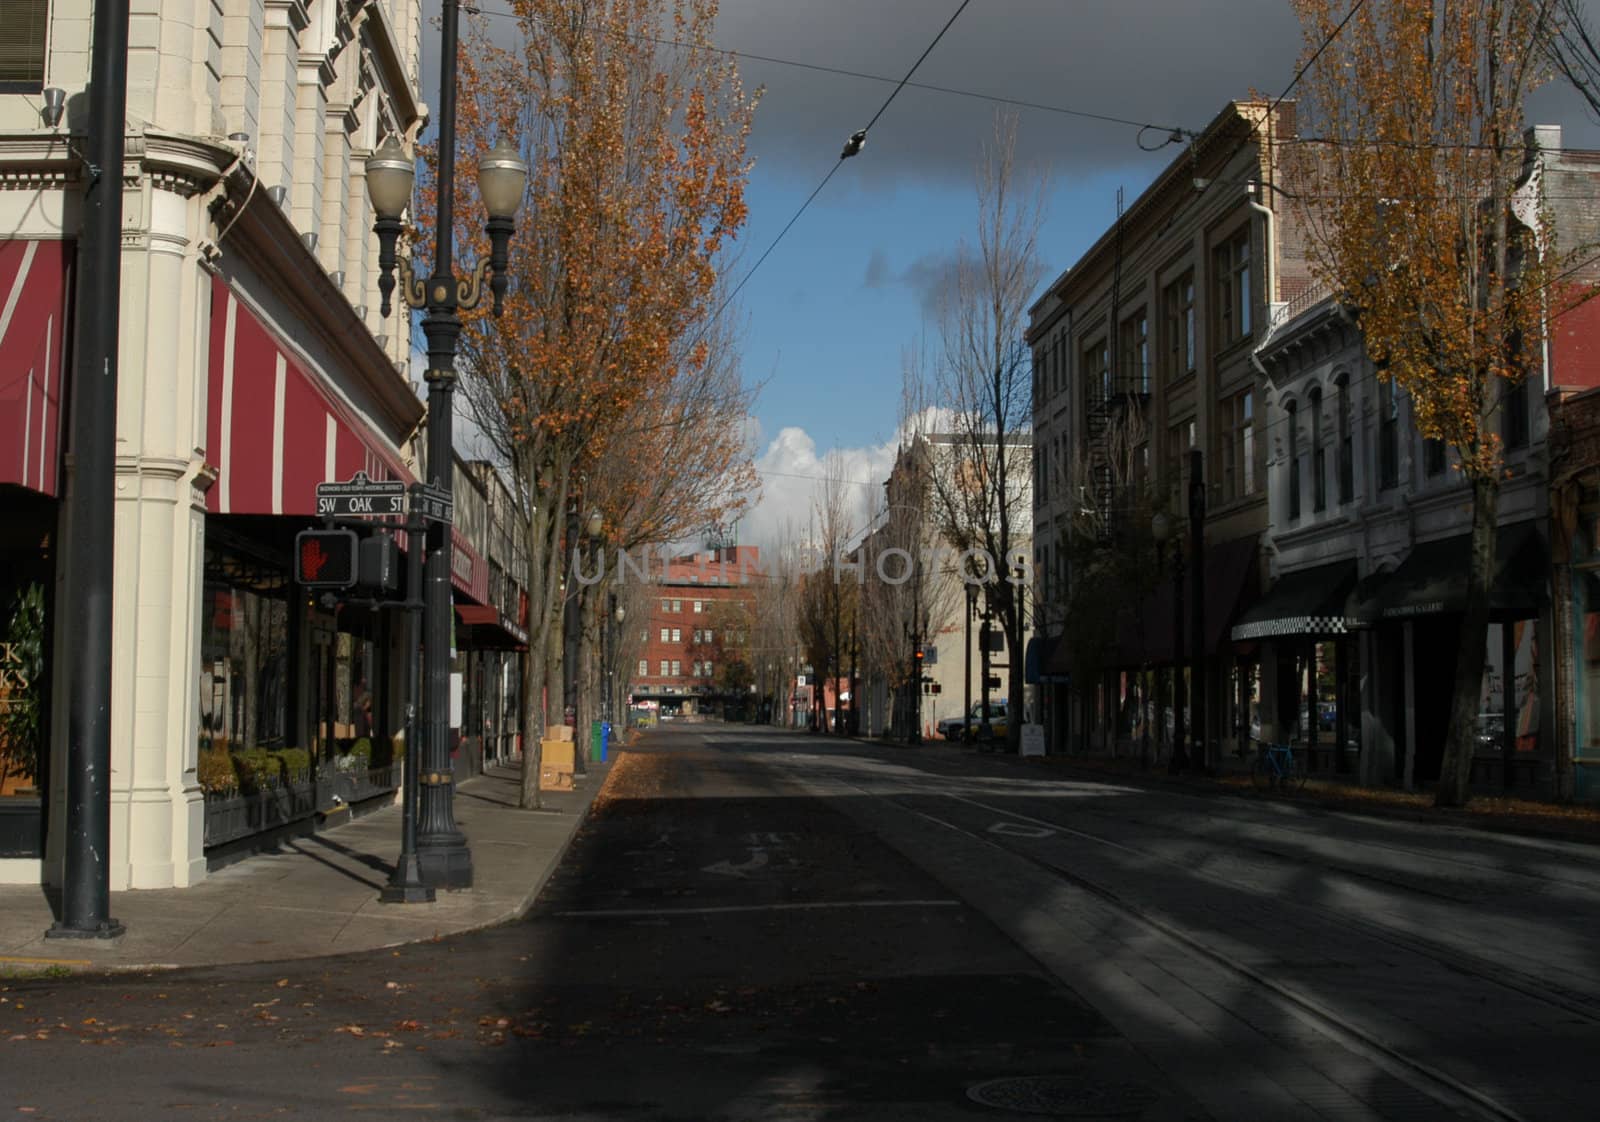 Streets of Portland by northwoodsphoto